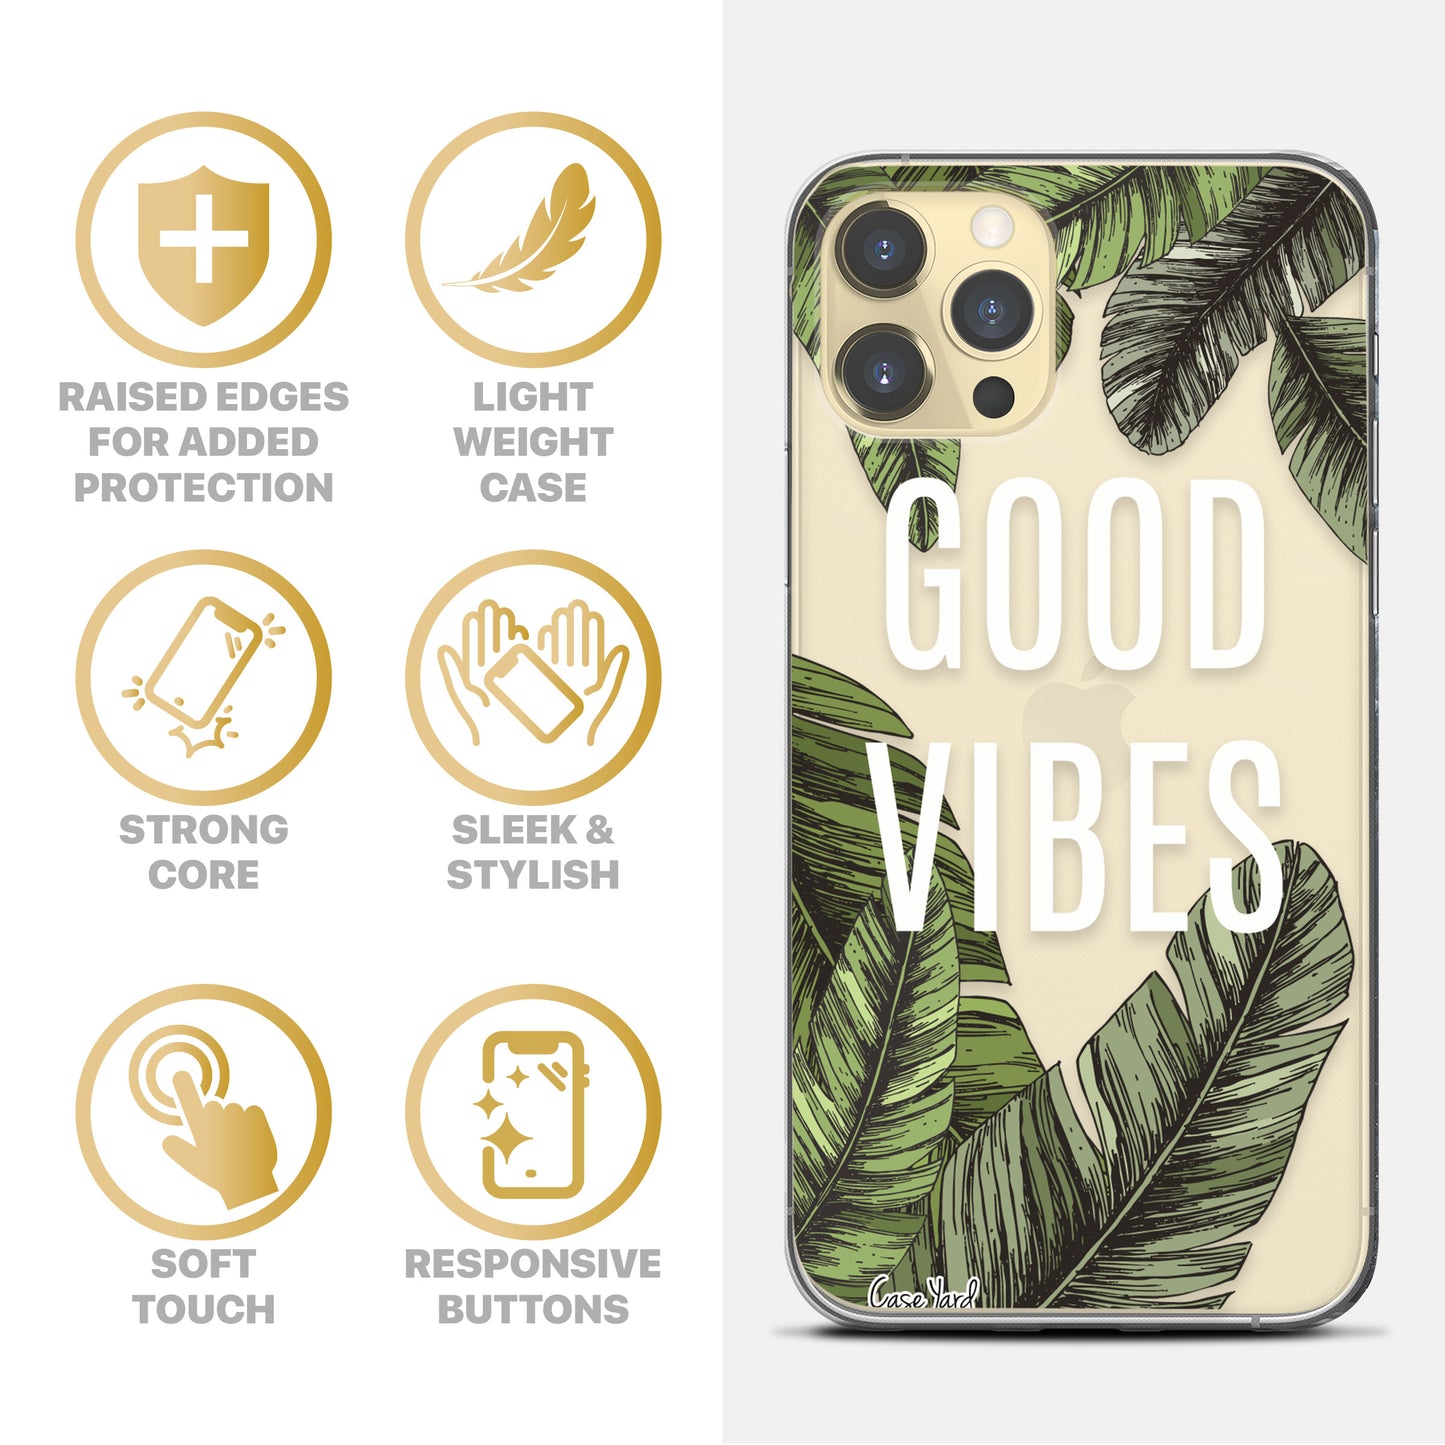 TPU Clear case with (Good Vibes) Design for iPhone & Samsung Phones